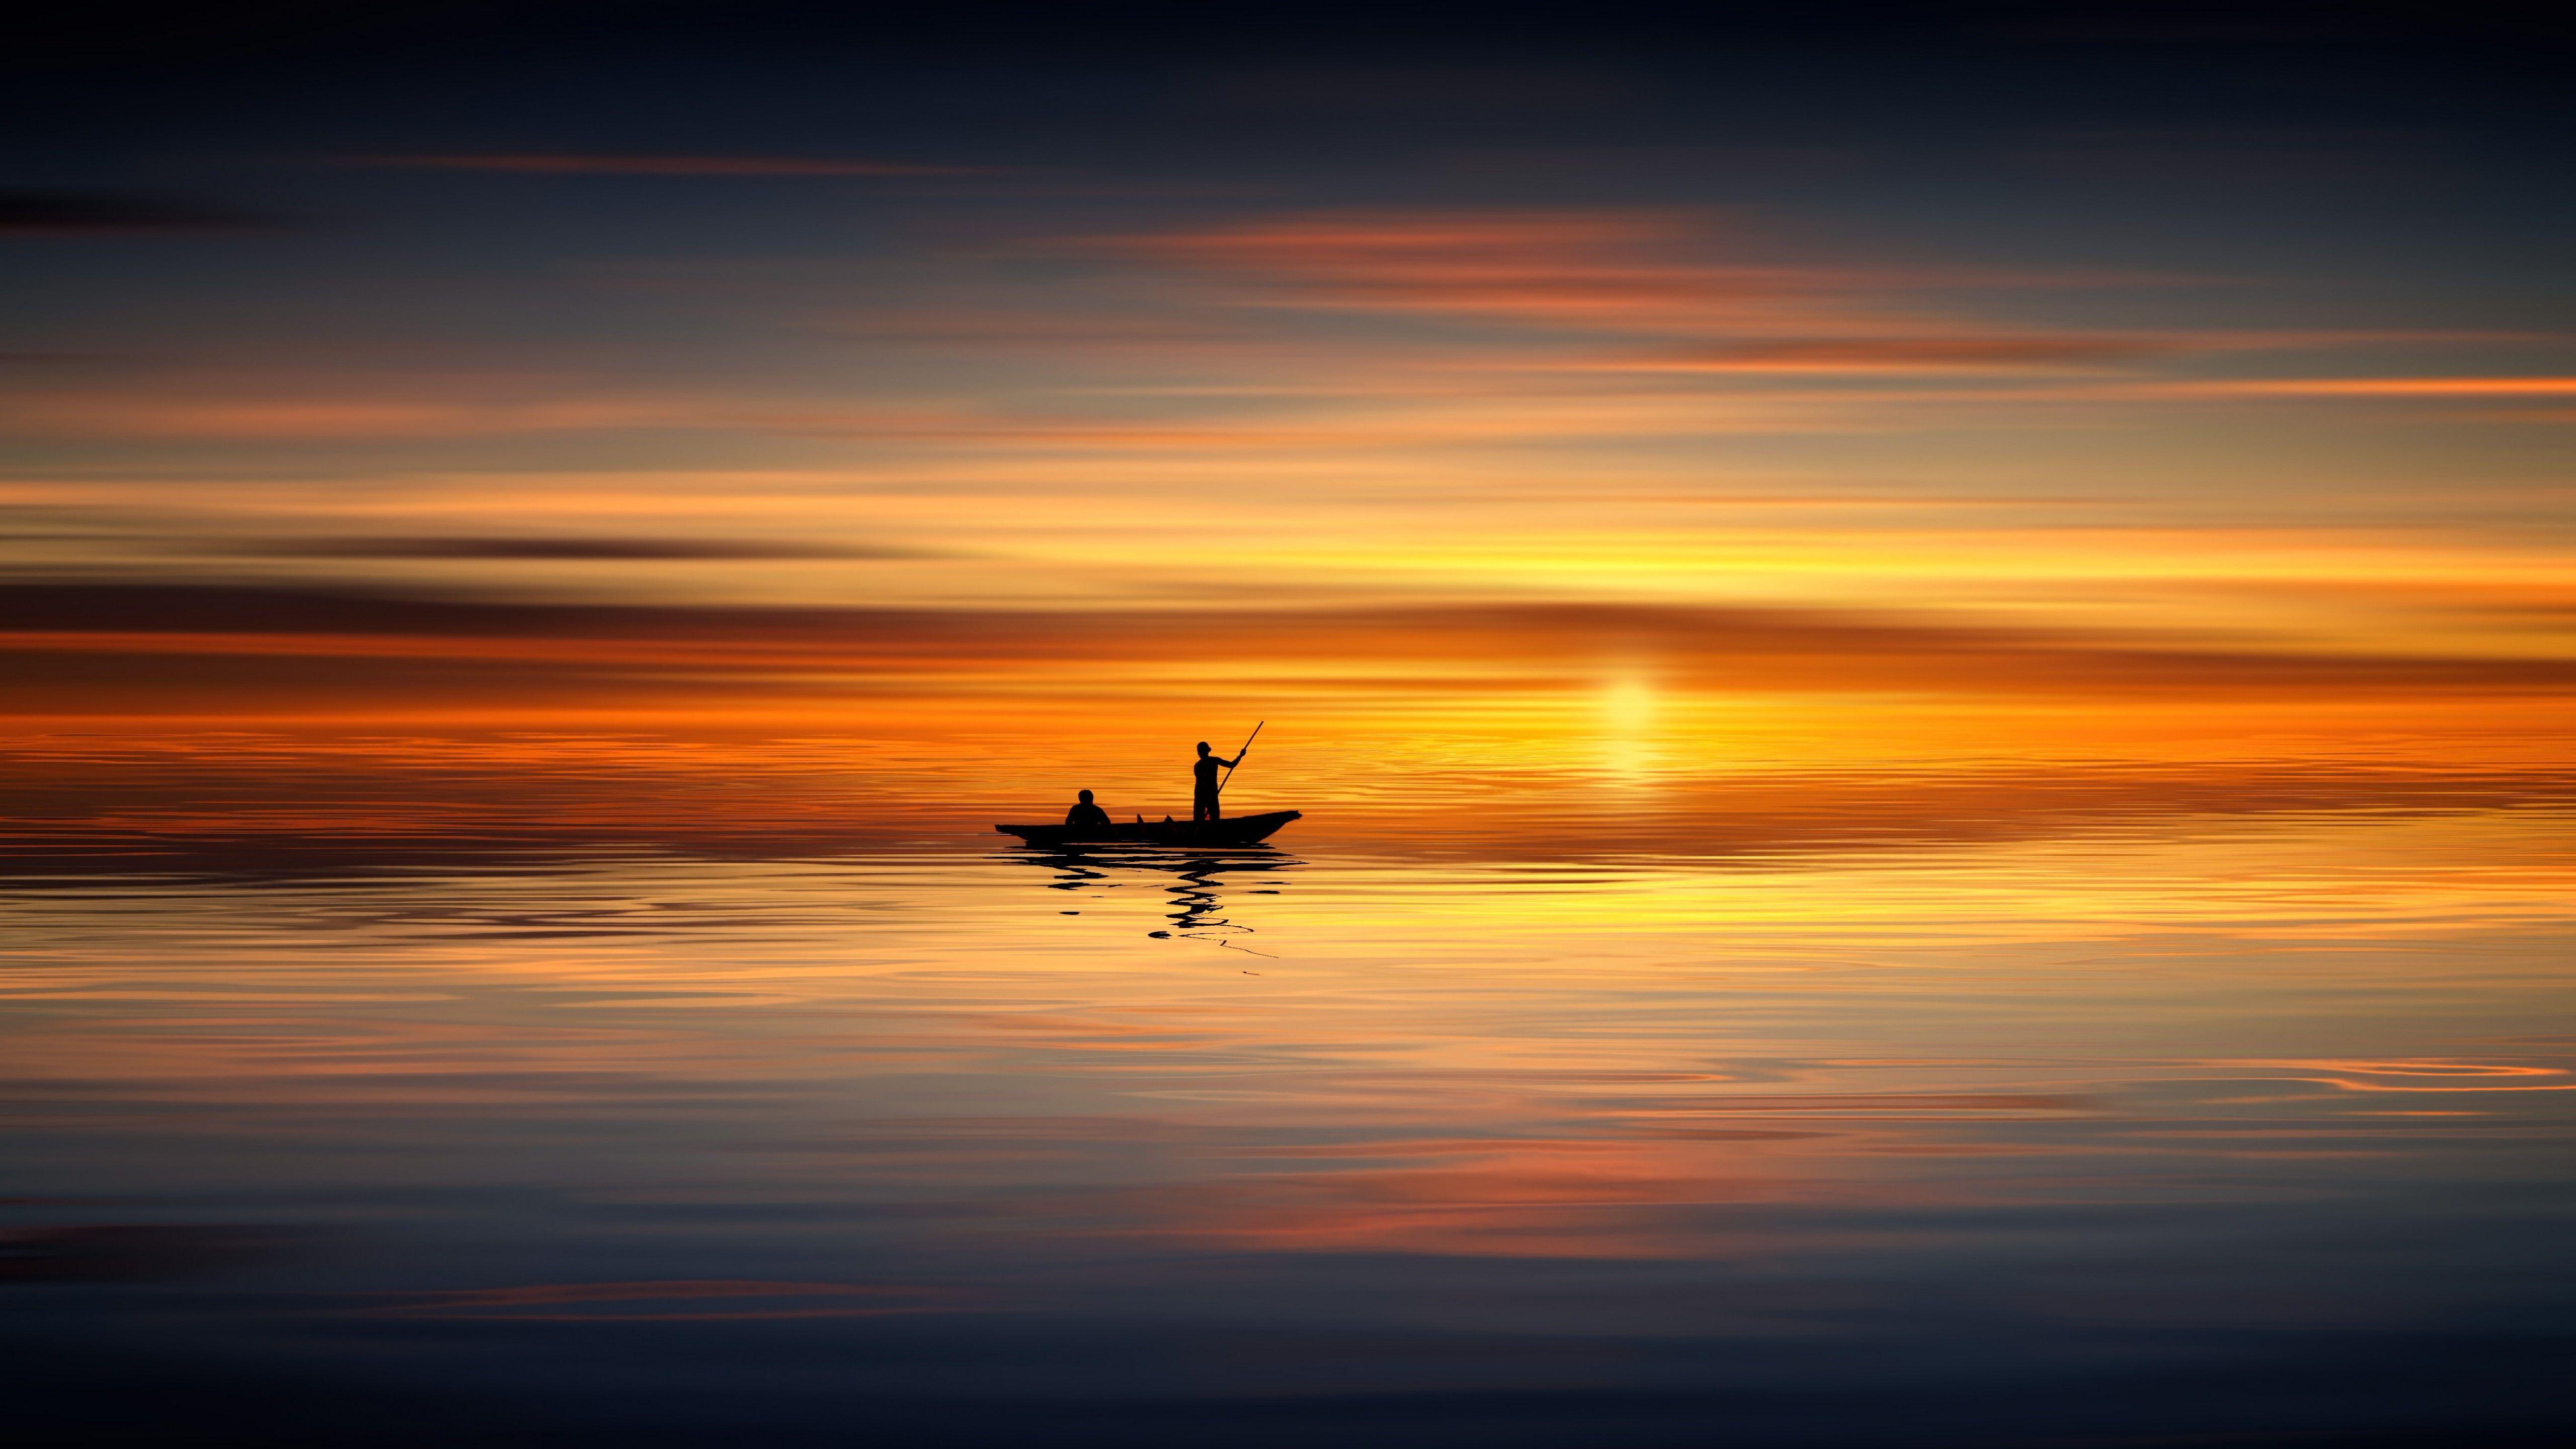 Fishing Sunset Wallpapers Top Free Fishing Sunset Backgrounds